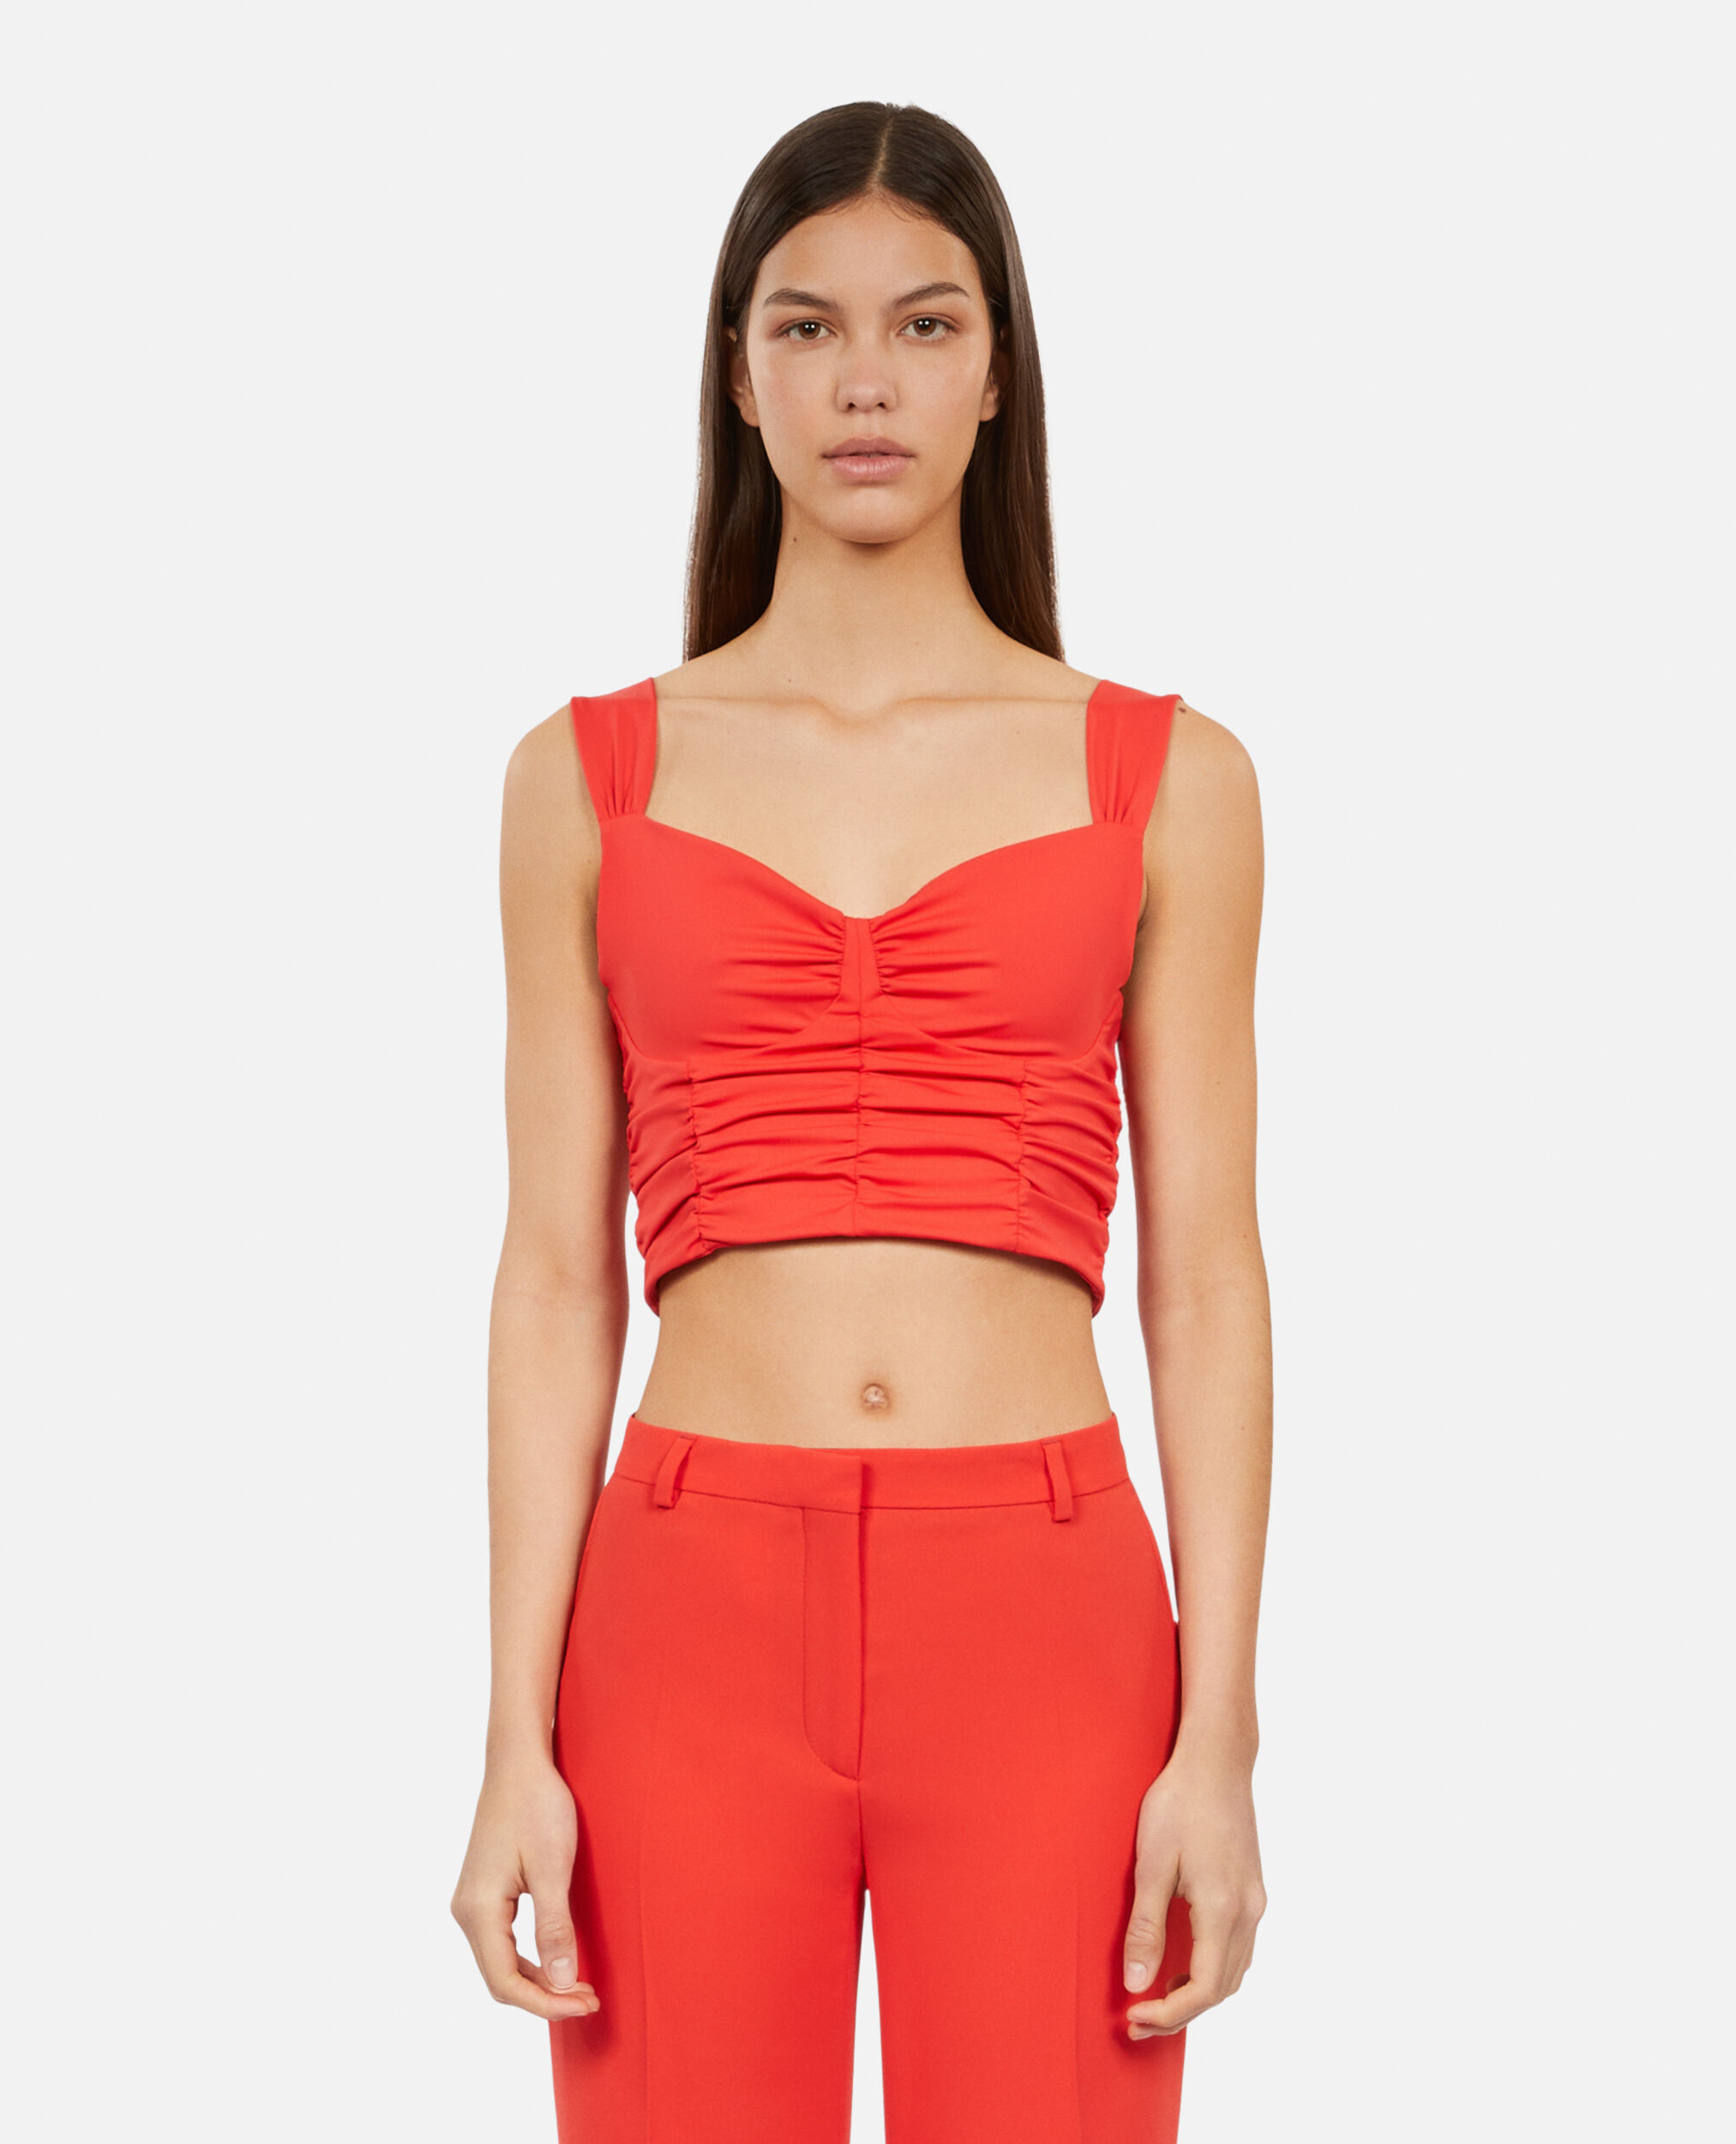 Short red top with draping, RED, hi-res image number null